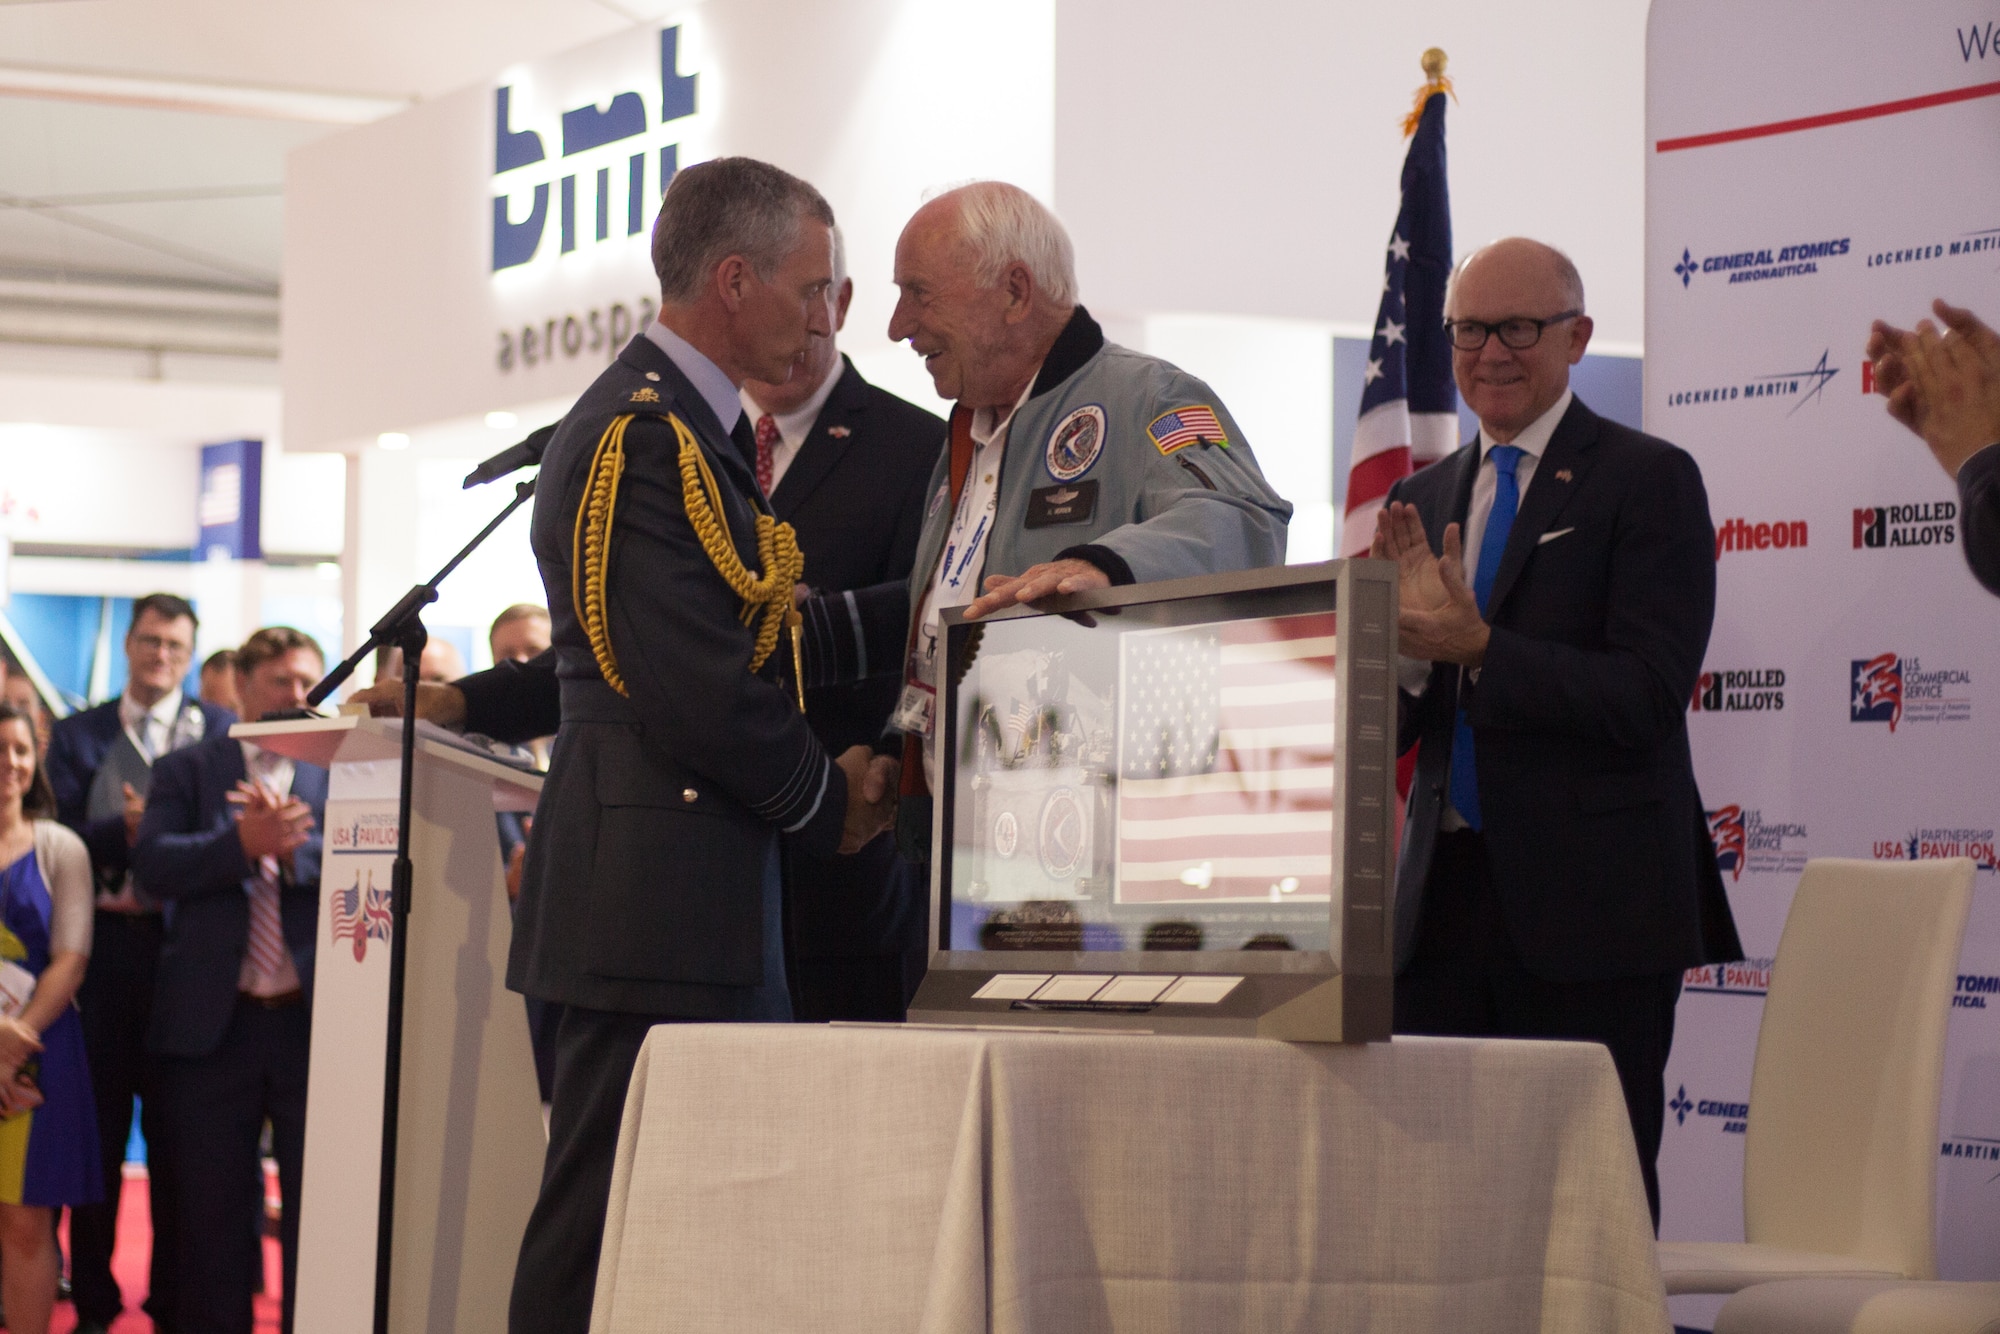 Retired Col. Al Woden, Command Module Pilot for Apollo 15, presents a flag from the 1971 lunar mission to Royal Air Force Chief of Staff, Air Chief Marshal Sir Stephen Hillier, during the Farnborough International Airshow opening ceremony July 16, 2018. By participating in the U.K-sponsored airshow, the U.S. will promote standardization and interoperability of equipment with NATO Allies and other potential coalition partners in front of more than 1,500 exhibitors from 52 countries. (U.S. Air Force photo by Capt. Allie Delury/Released)